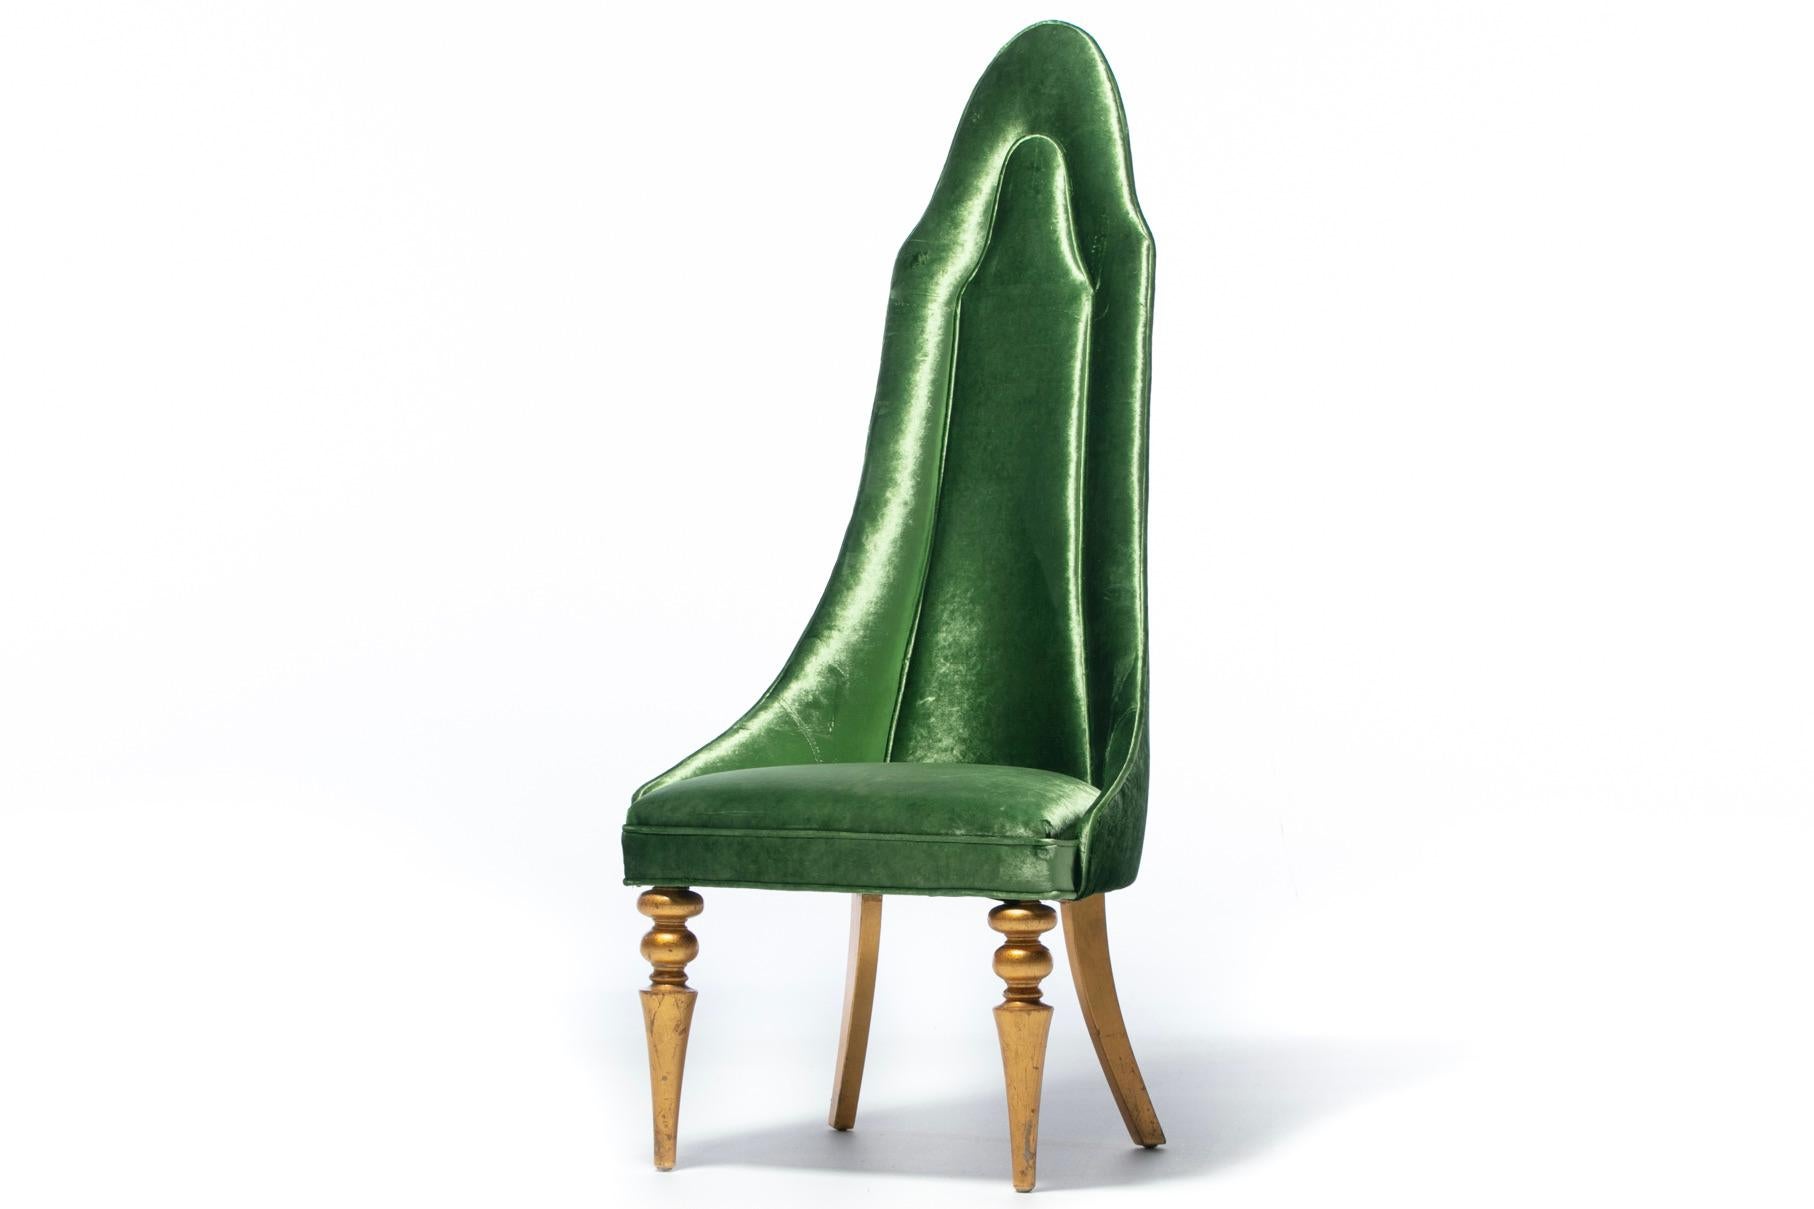 Ciao bella Italian Hollywood Regency lipstick chair upholstered in green velvet with original gold leaf spindled legs. Side Chair. Office Chair. Occasional Chair. Dramatically tall high back is channeled, curves and frames one in a shawl collar of